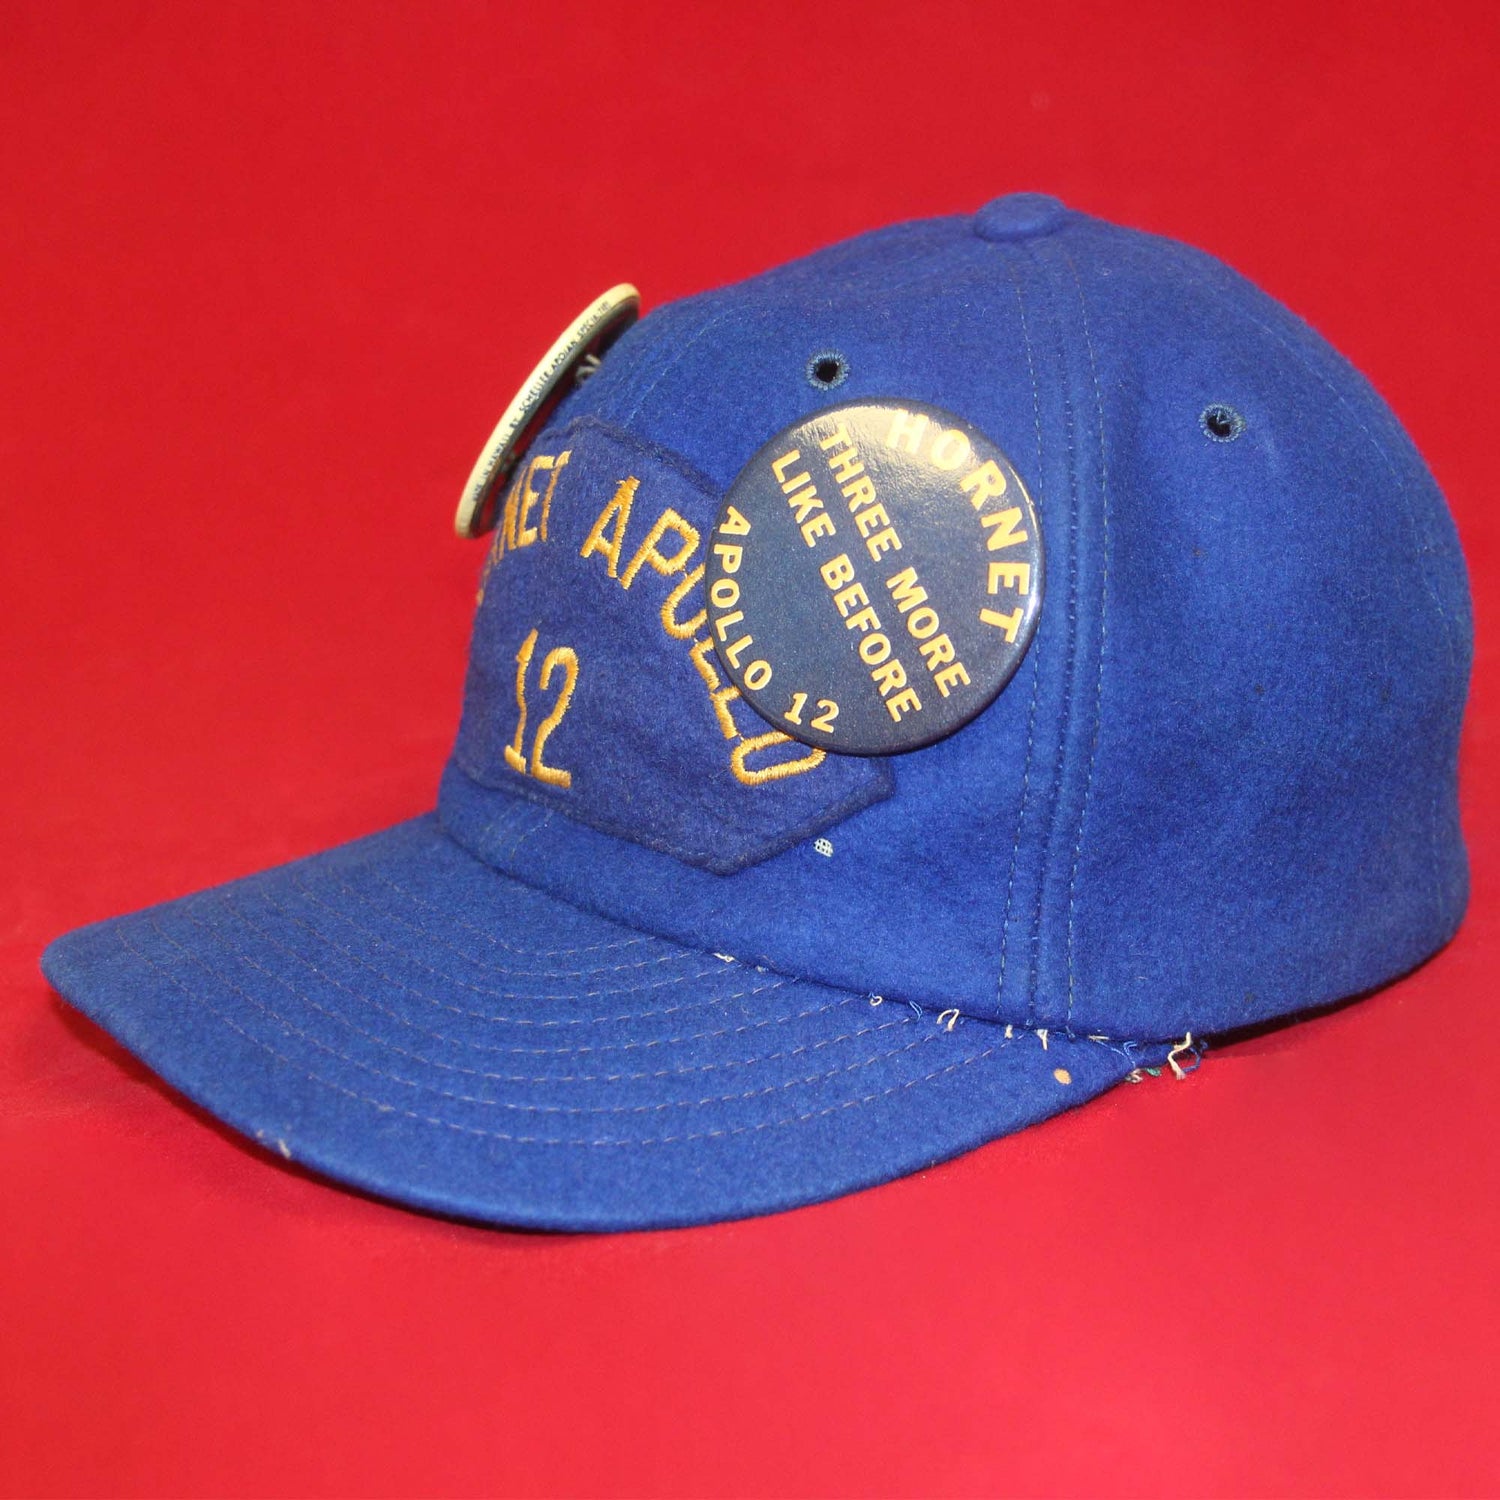 USS Hornet Apollo 12 Recovery Mission Crew Hat